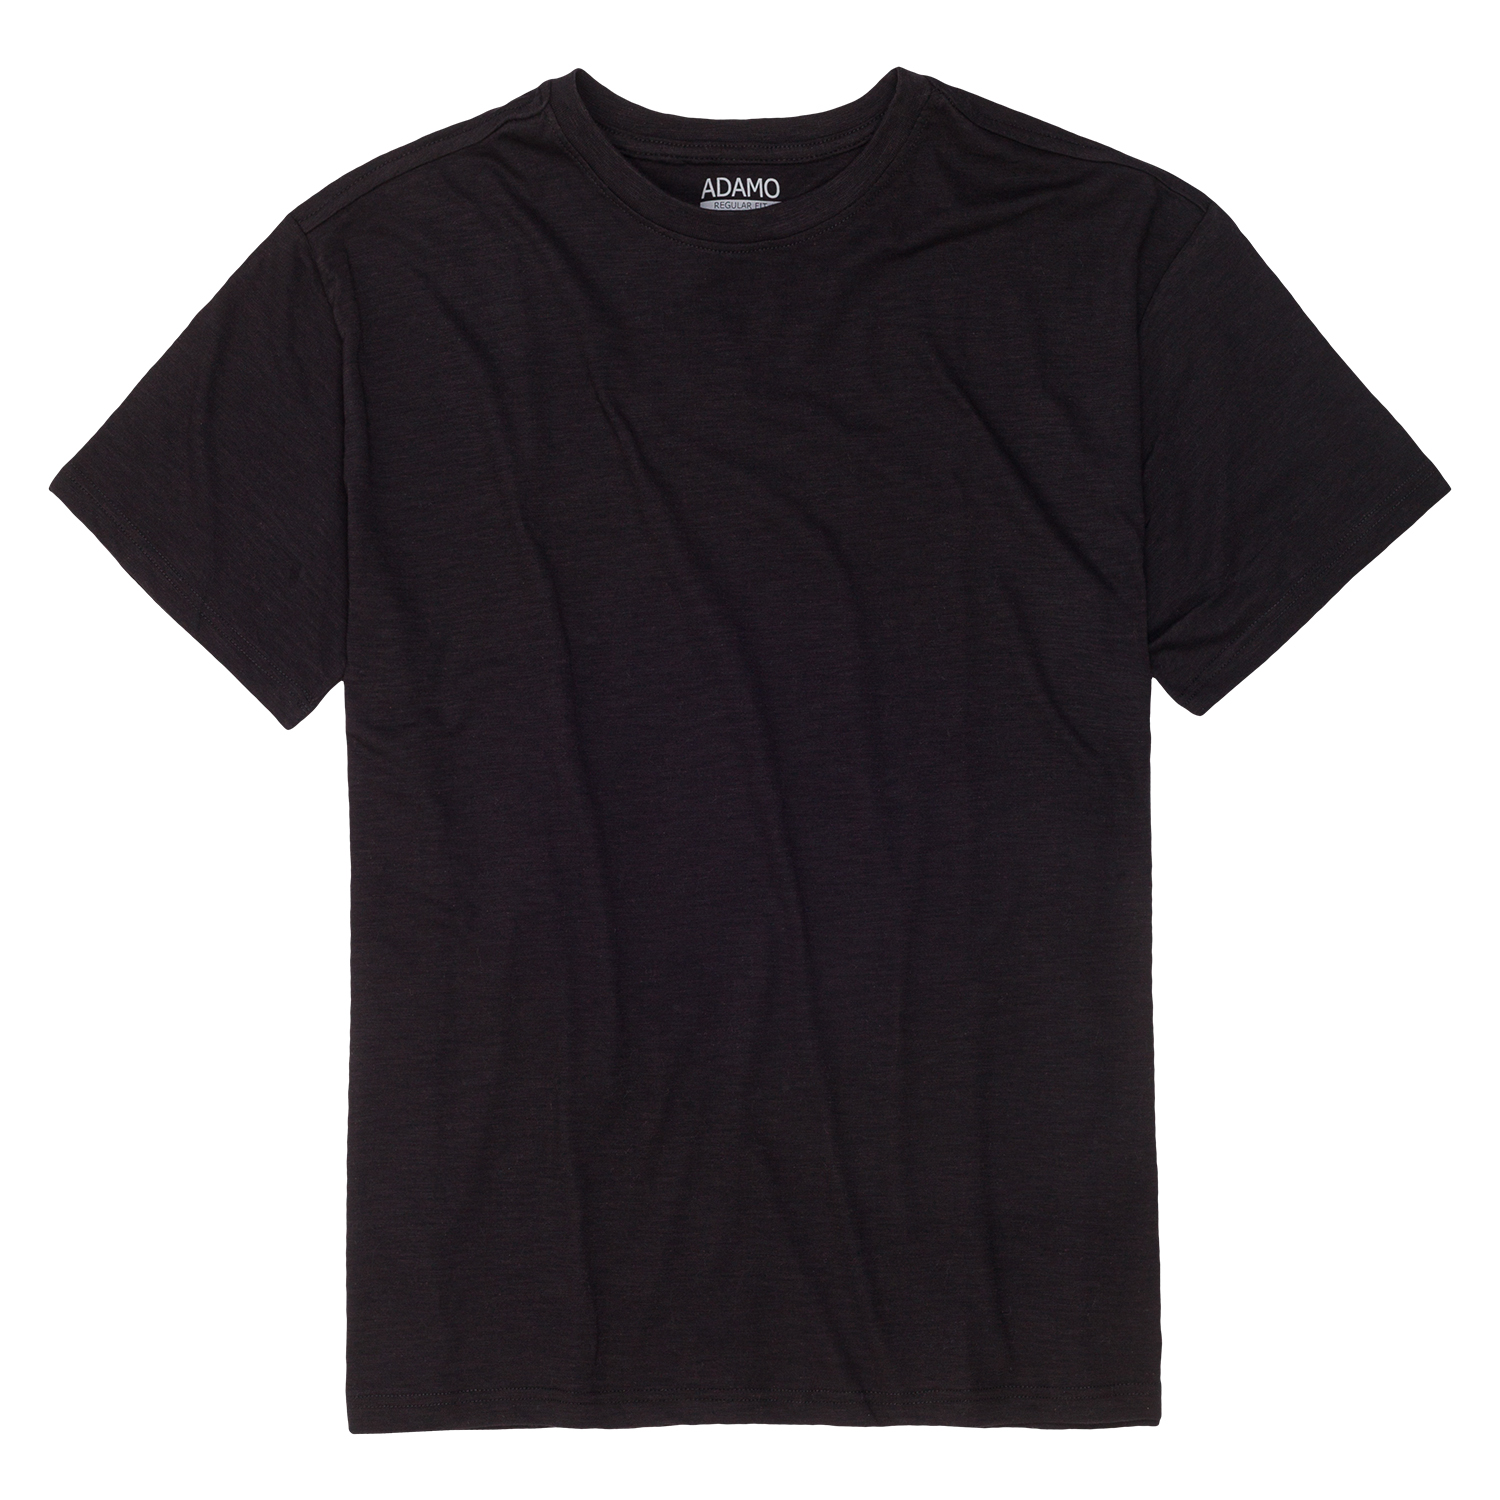 T-shirt in black series Kevin slub-effect regular fit by Adamo for men up to oversize 12XL